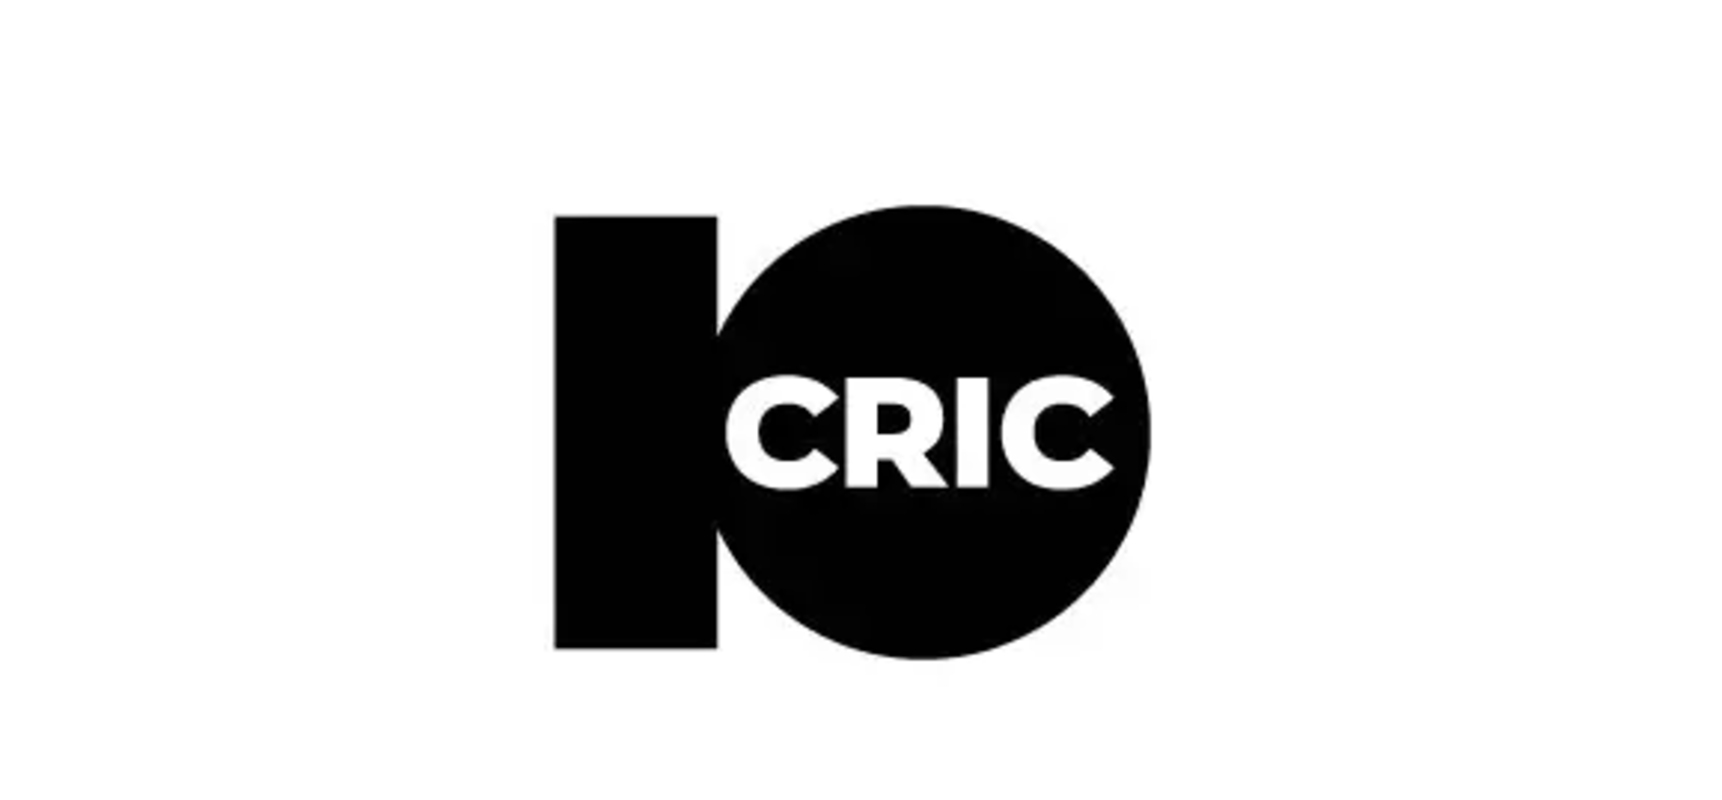 10cric review